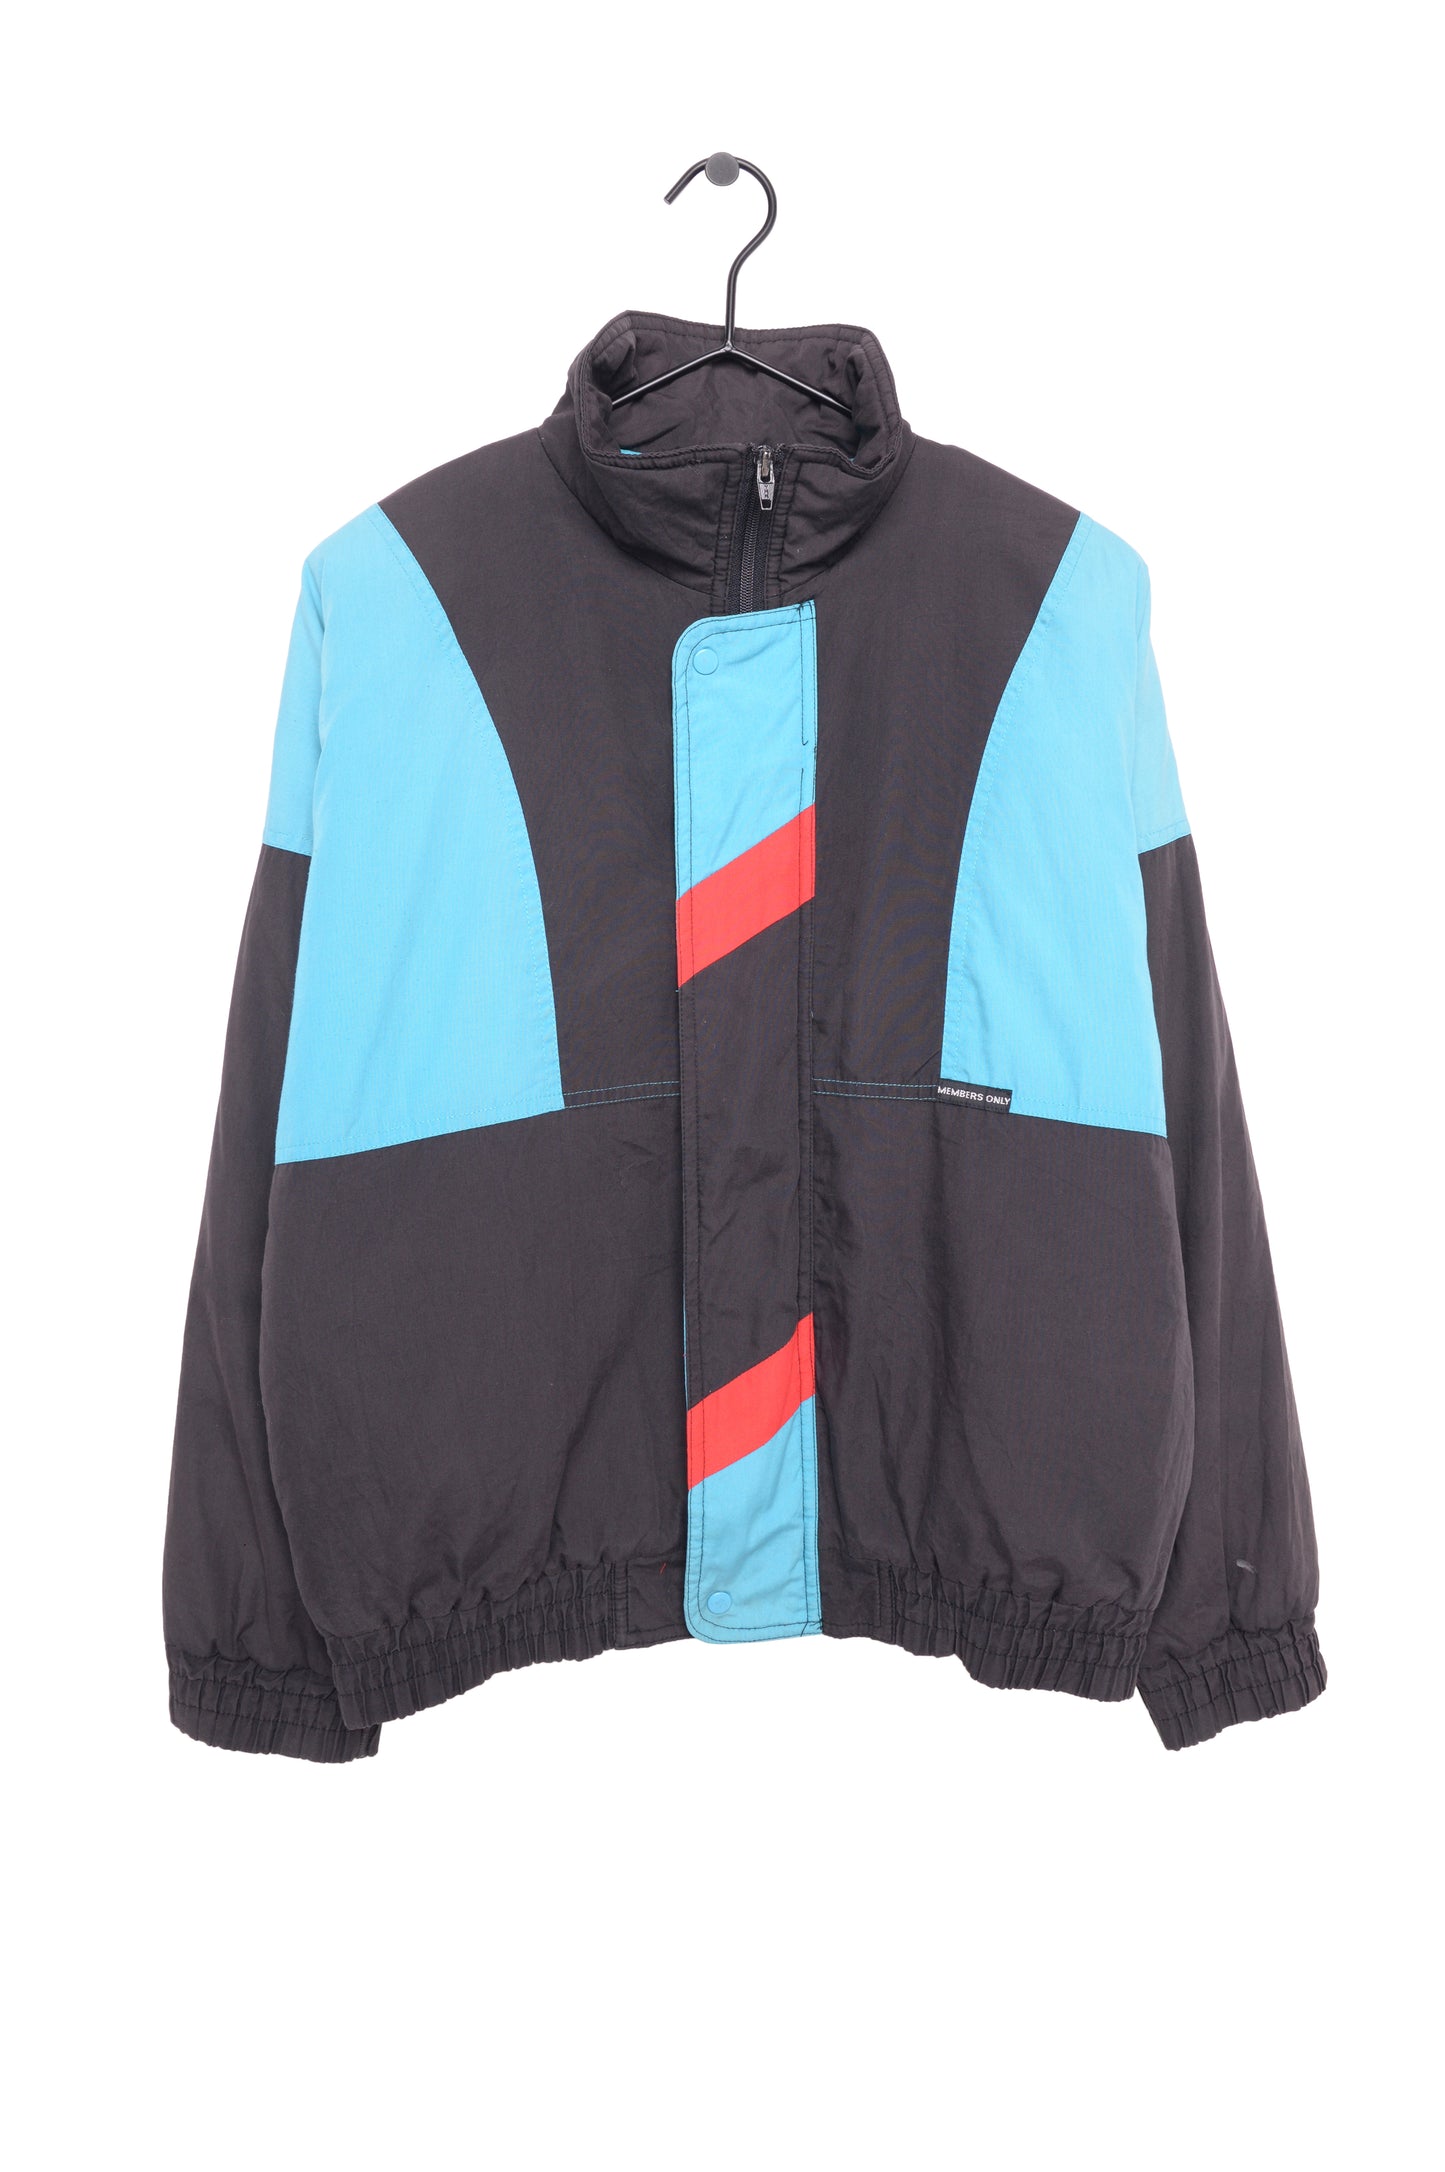 1980s Member's Only Colorblock Jacket